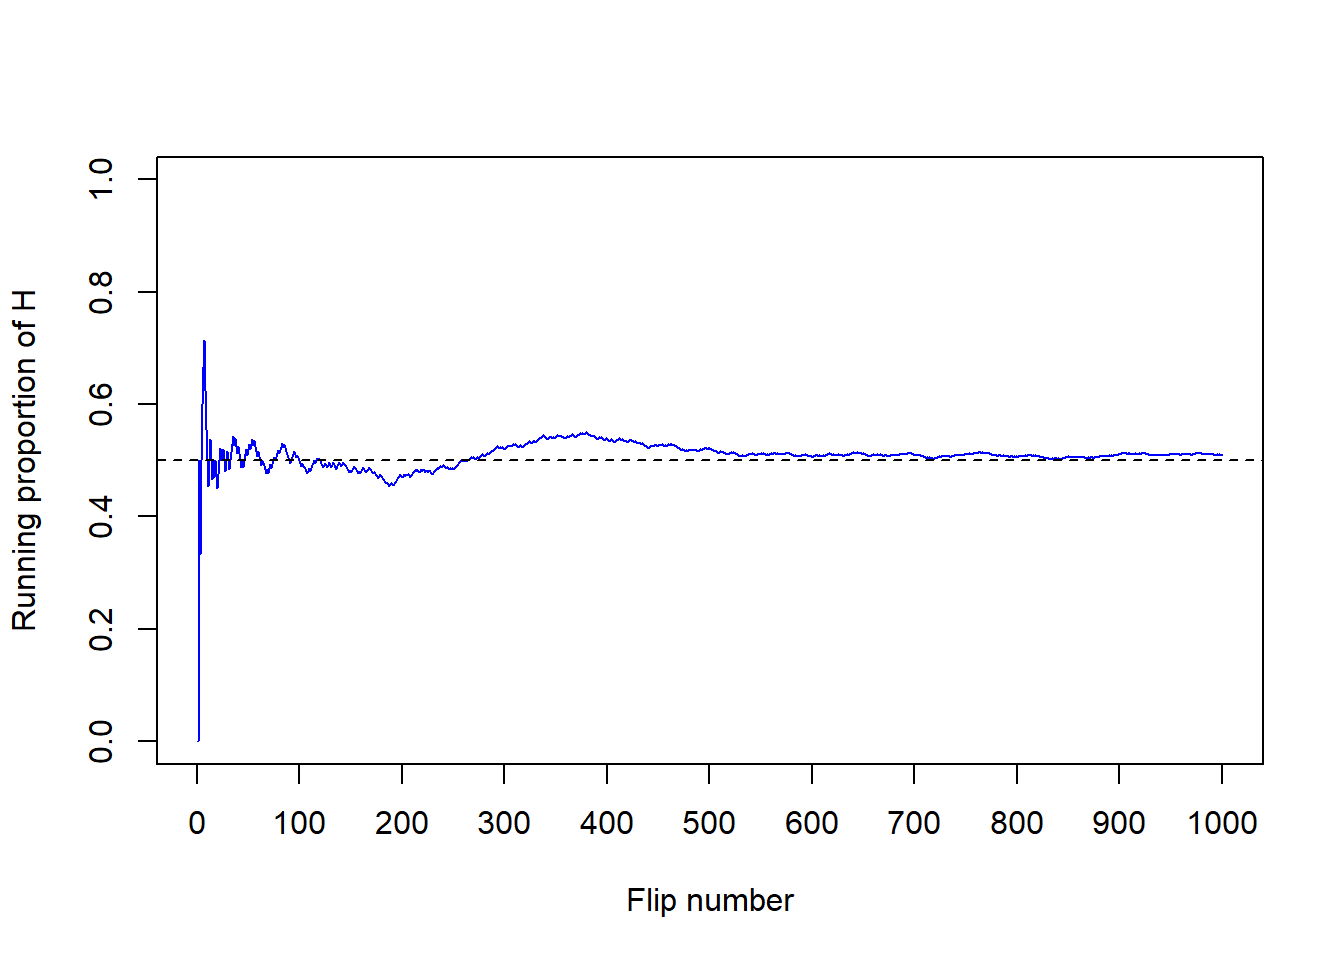 Running proportion of H versus number of flips for four sets of 1000 coin flips.